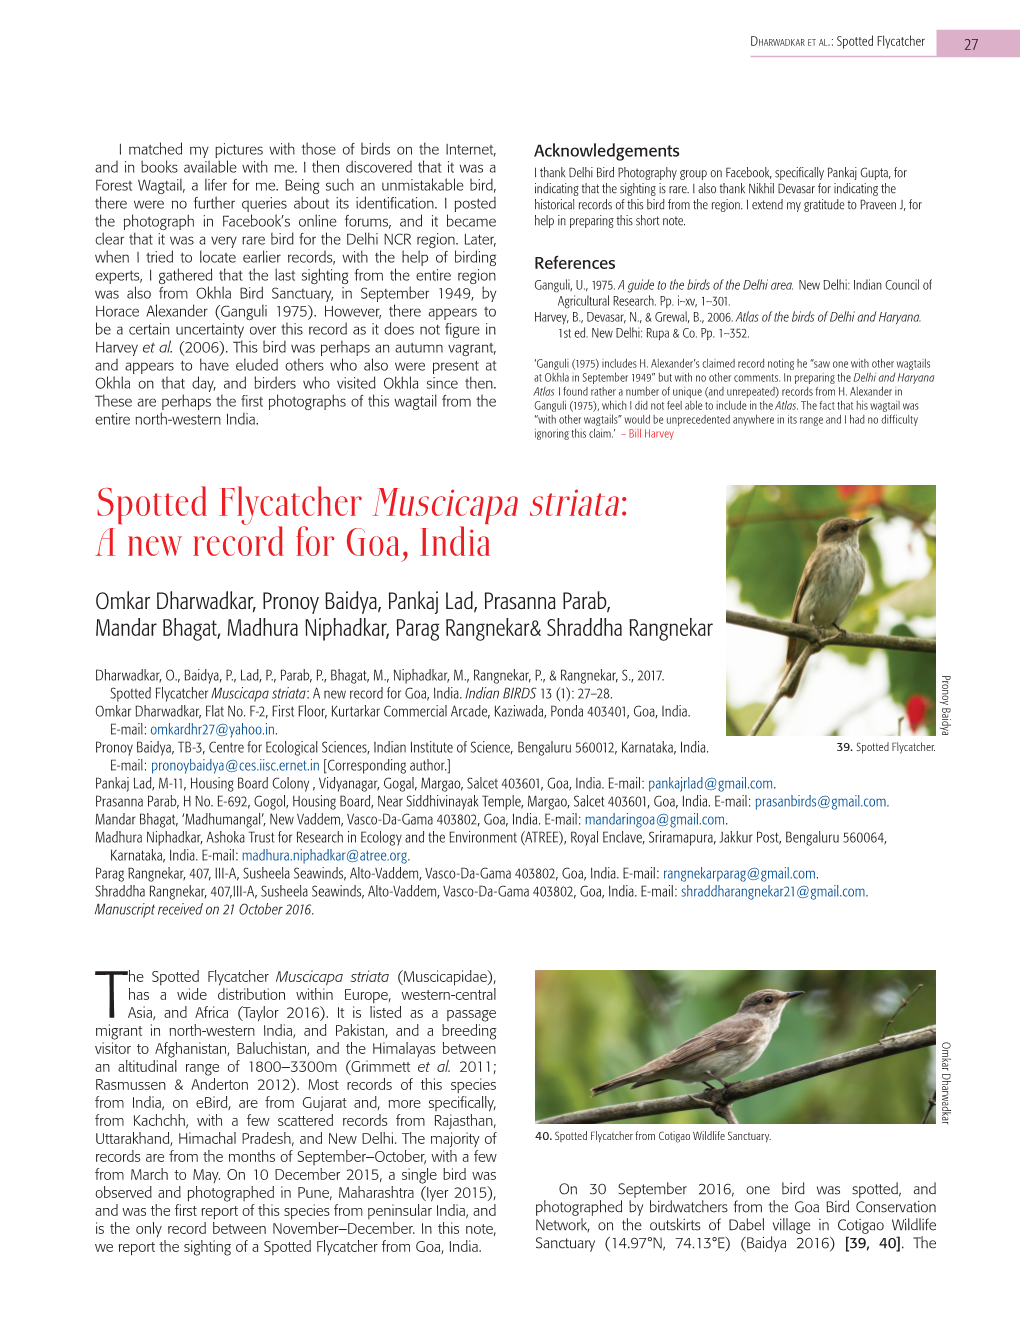 Spotted Flycatcher Muscicapa Striata: a New Record for Goa, India